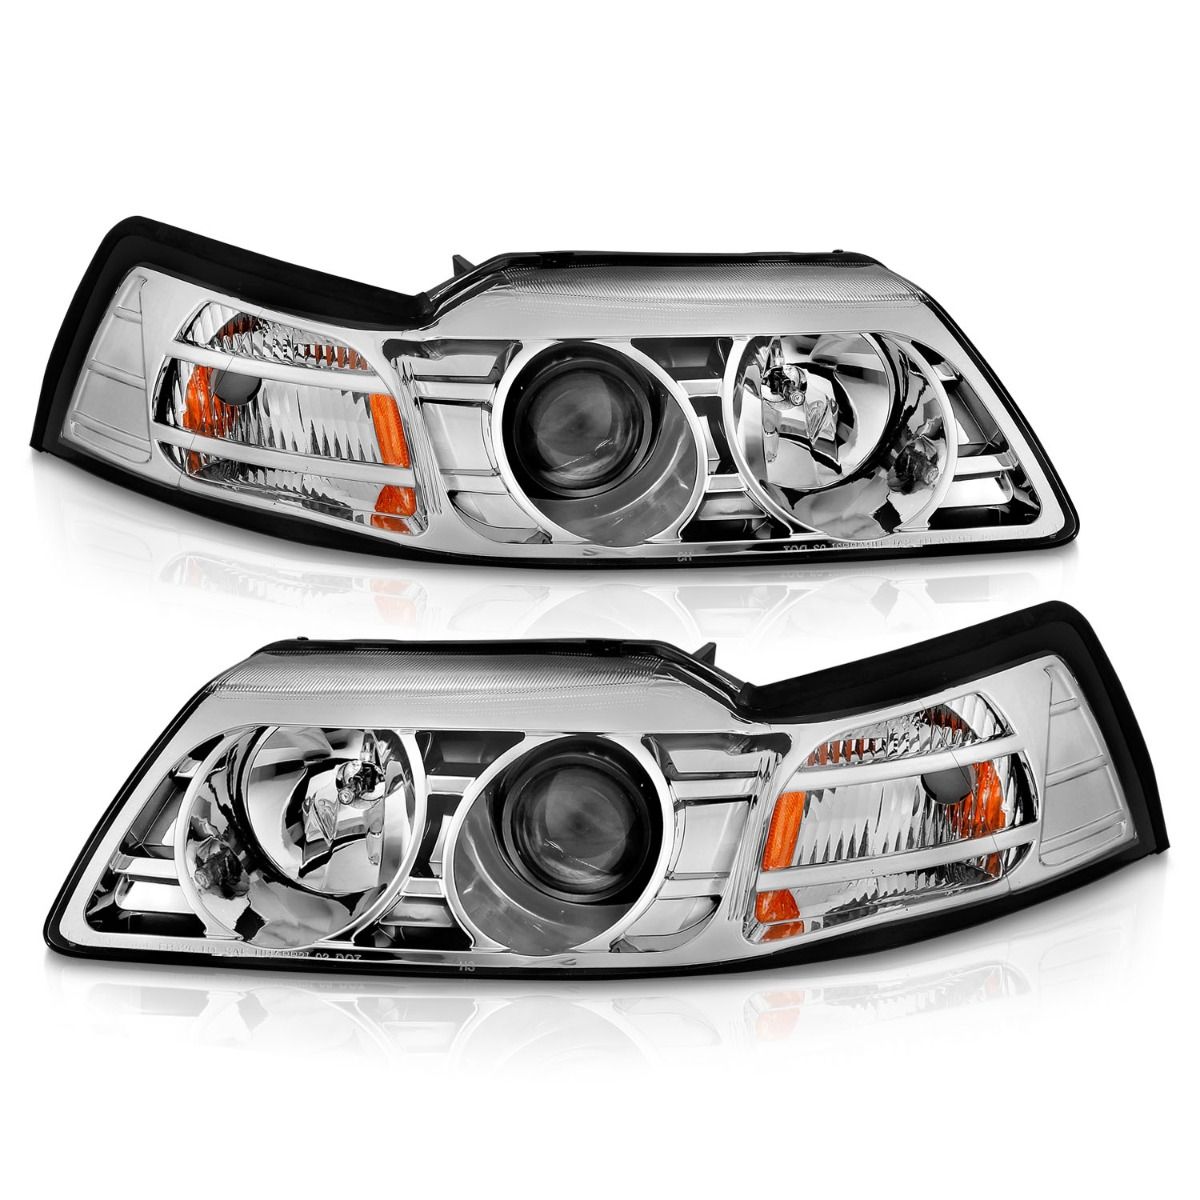 FORD PROJECTOR HEADLIGHTS, FORD MUSTANG HEADLIGHTS, FORD 99-04 HEADLIGHTS, PROJECTOR HEADLIGHTS, CHROME HOUSING, Anzo HEADLIGHTS